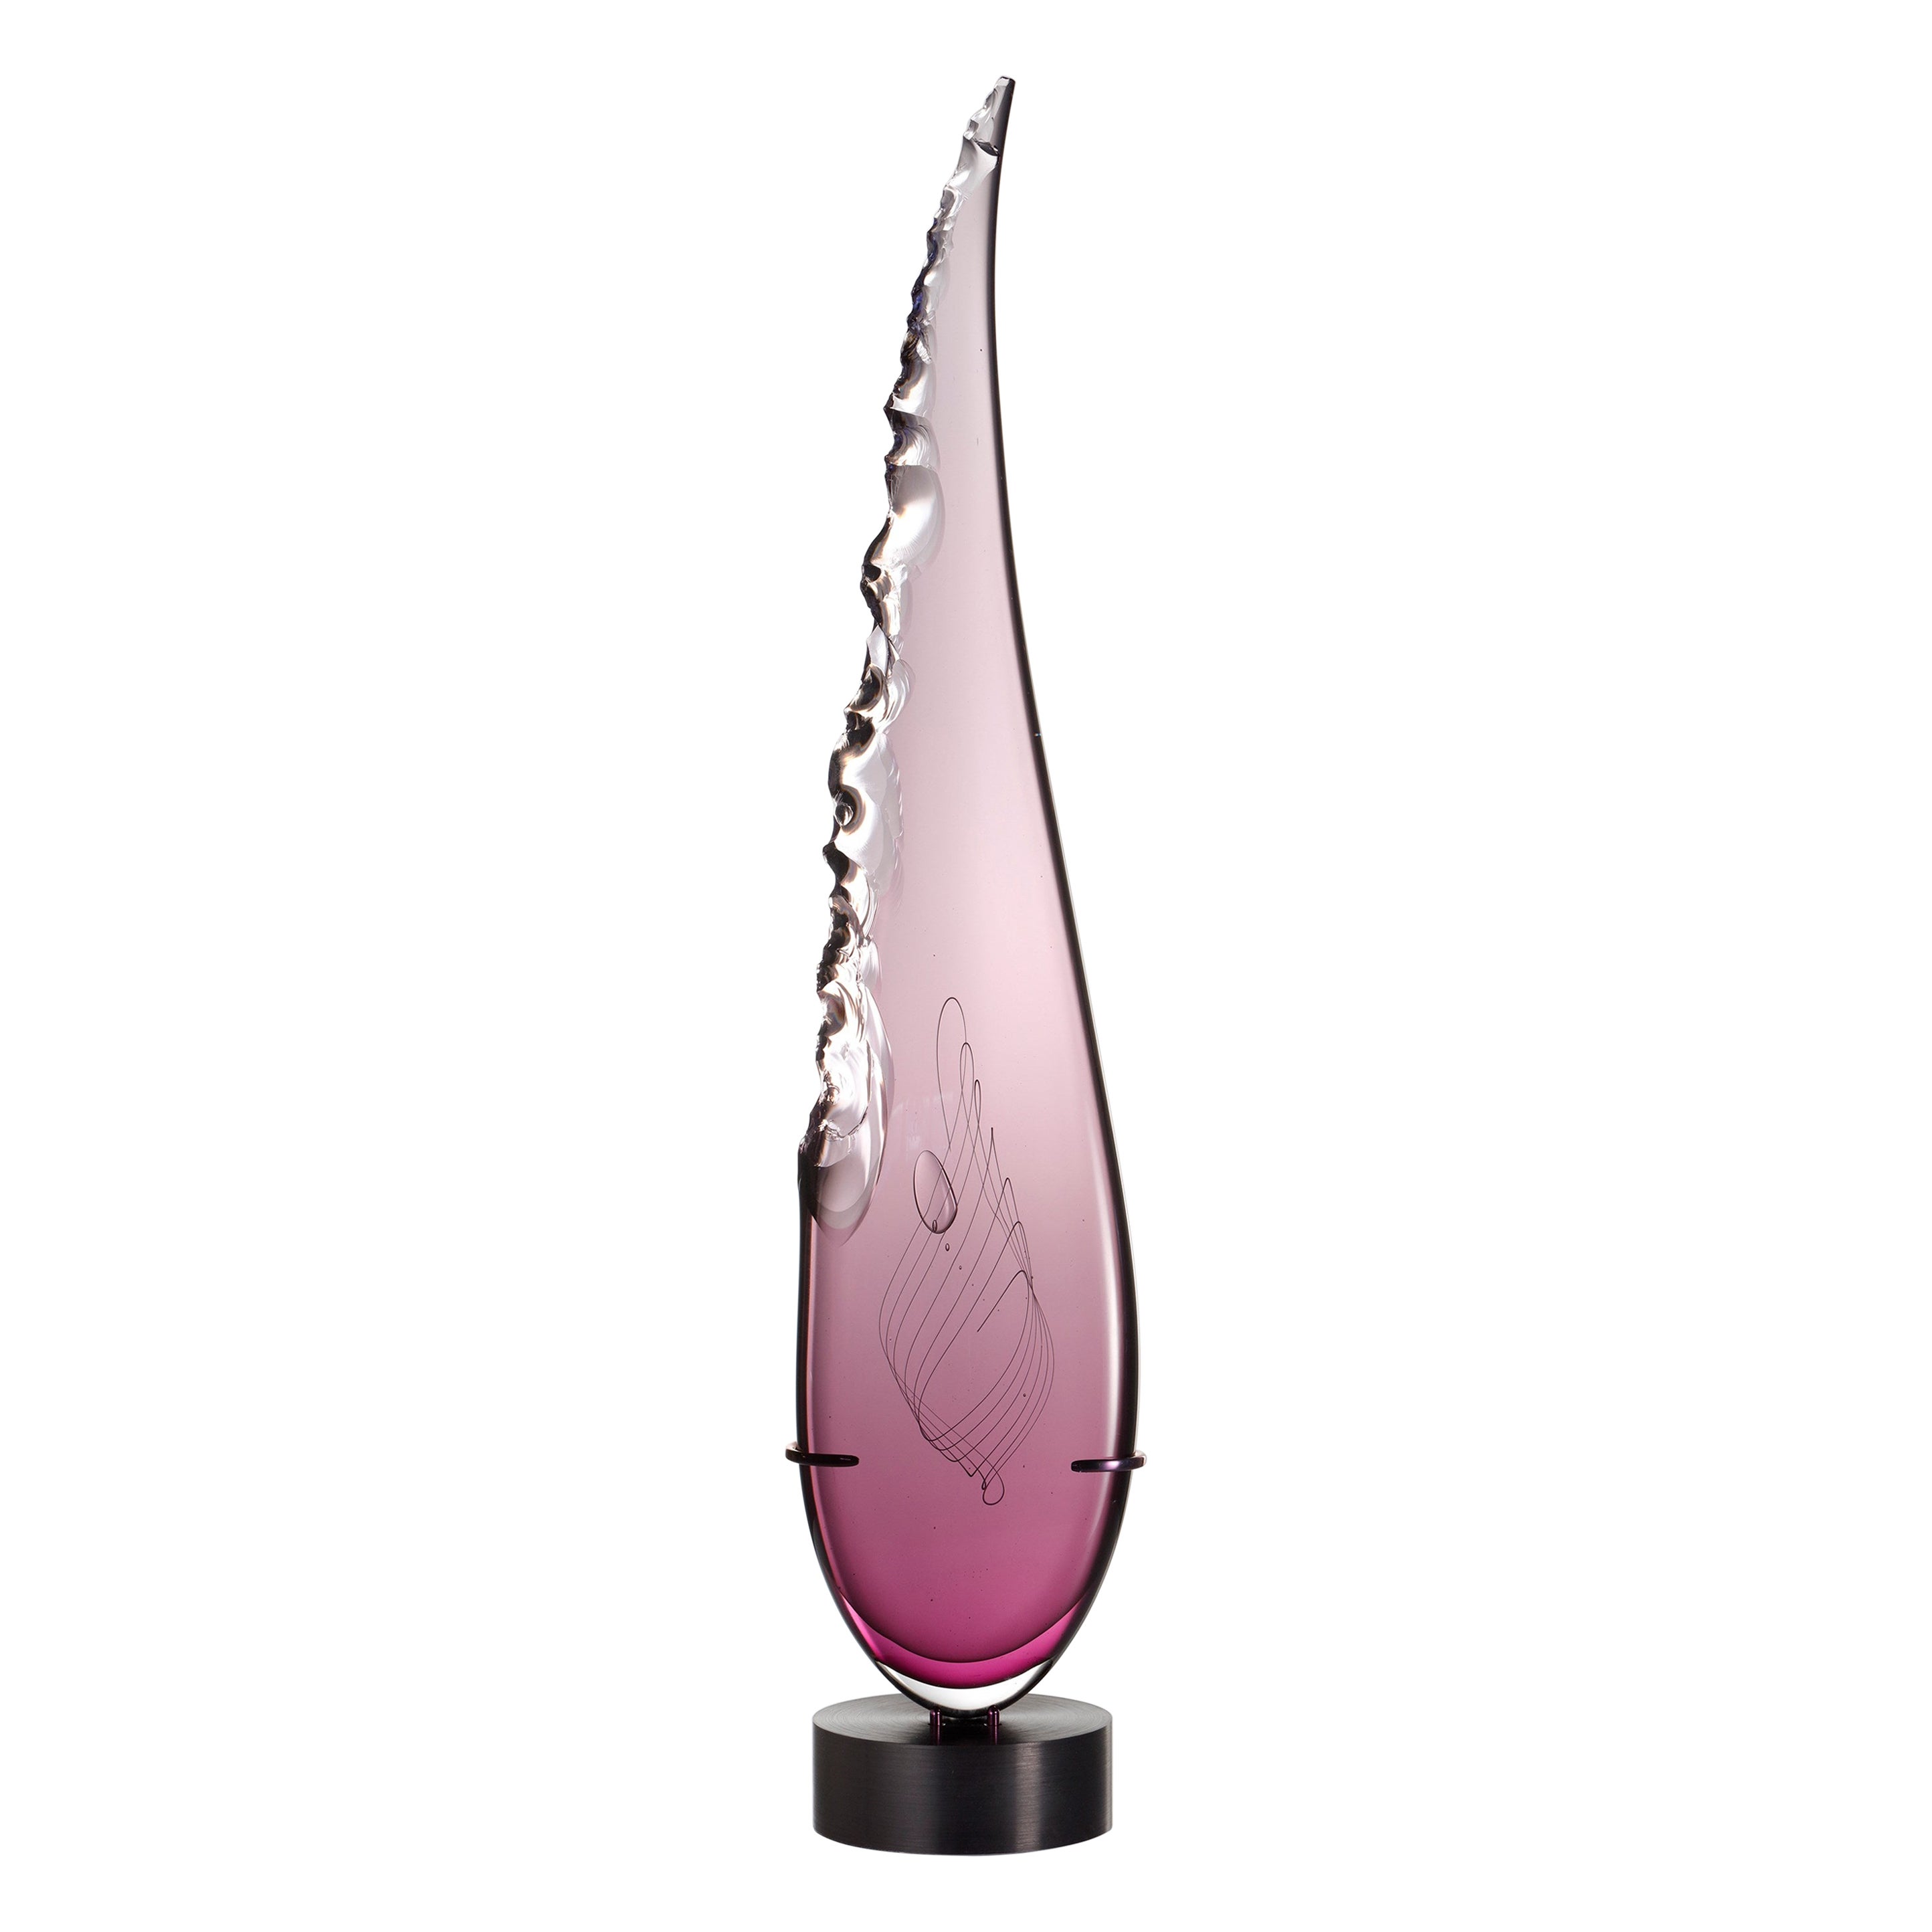 Clovis in Amethyst, a Unique Tall Abstract Glass Sculpture by James Devereux